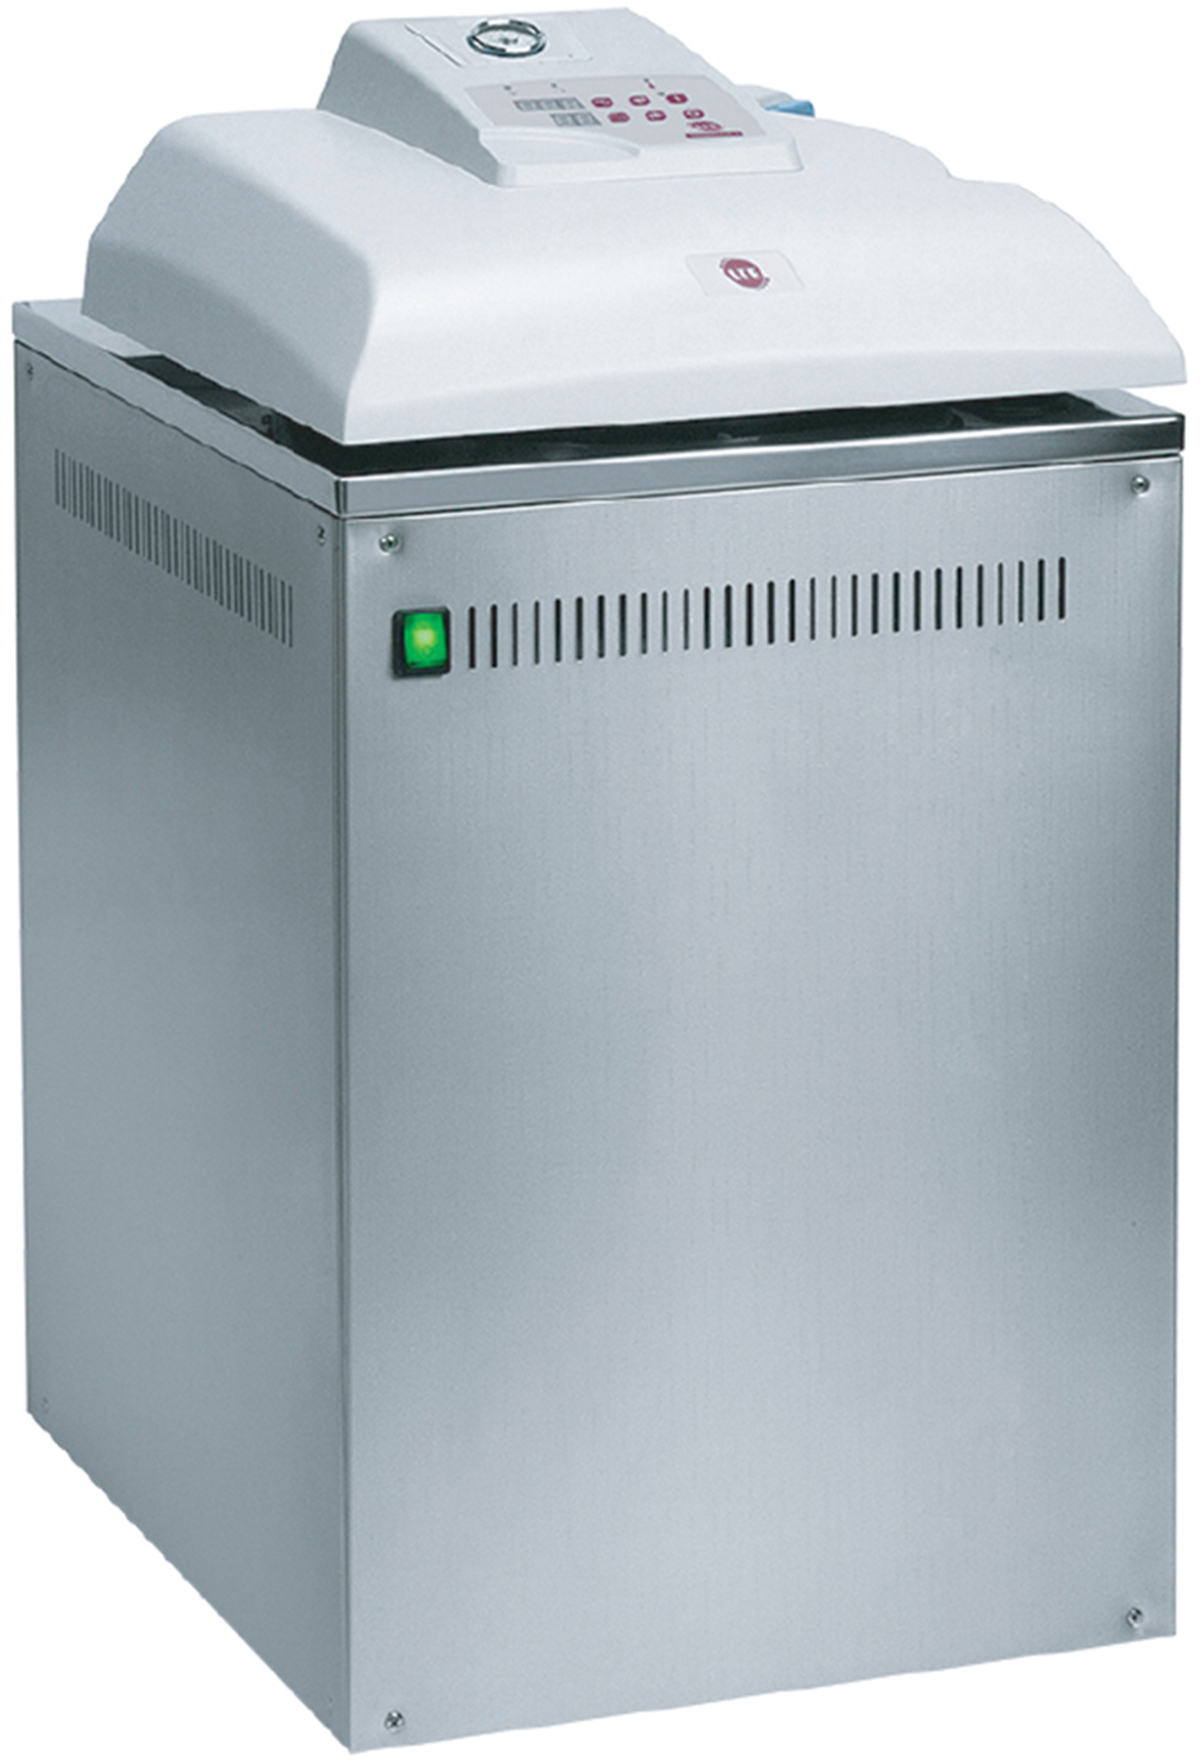 Touchclave-V series of cylindrical autoclaves thoroughly cleans laboratory glassware